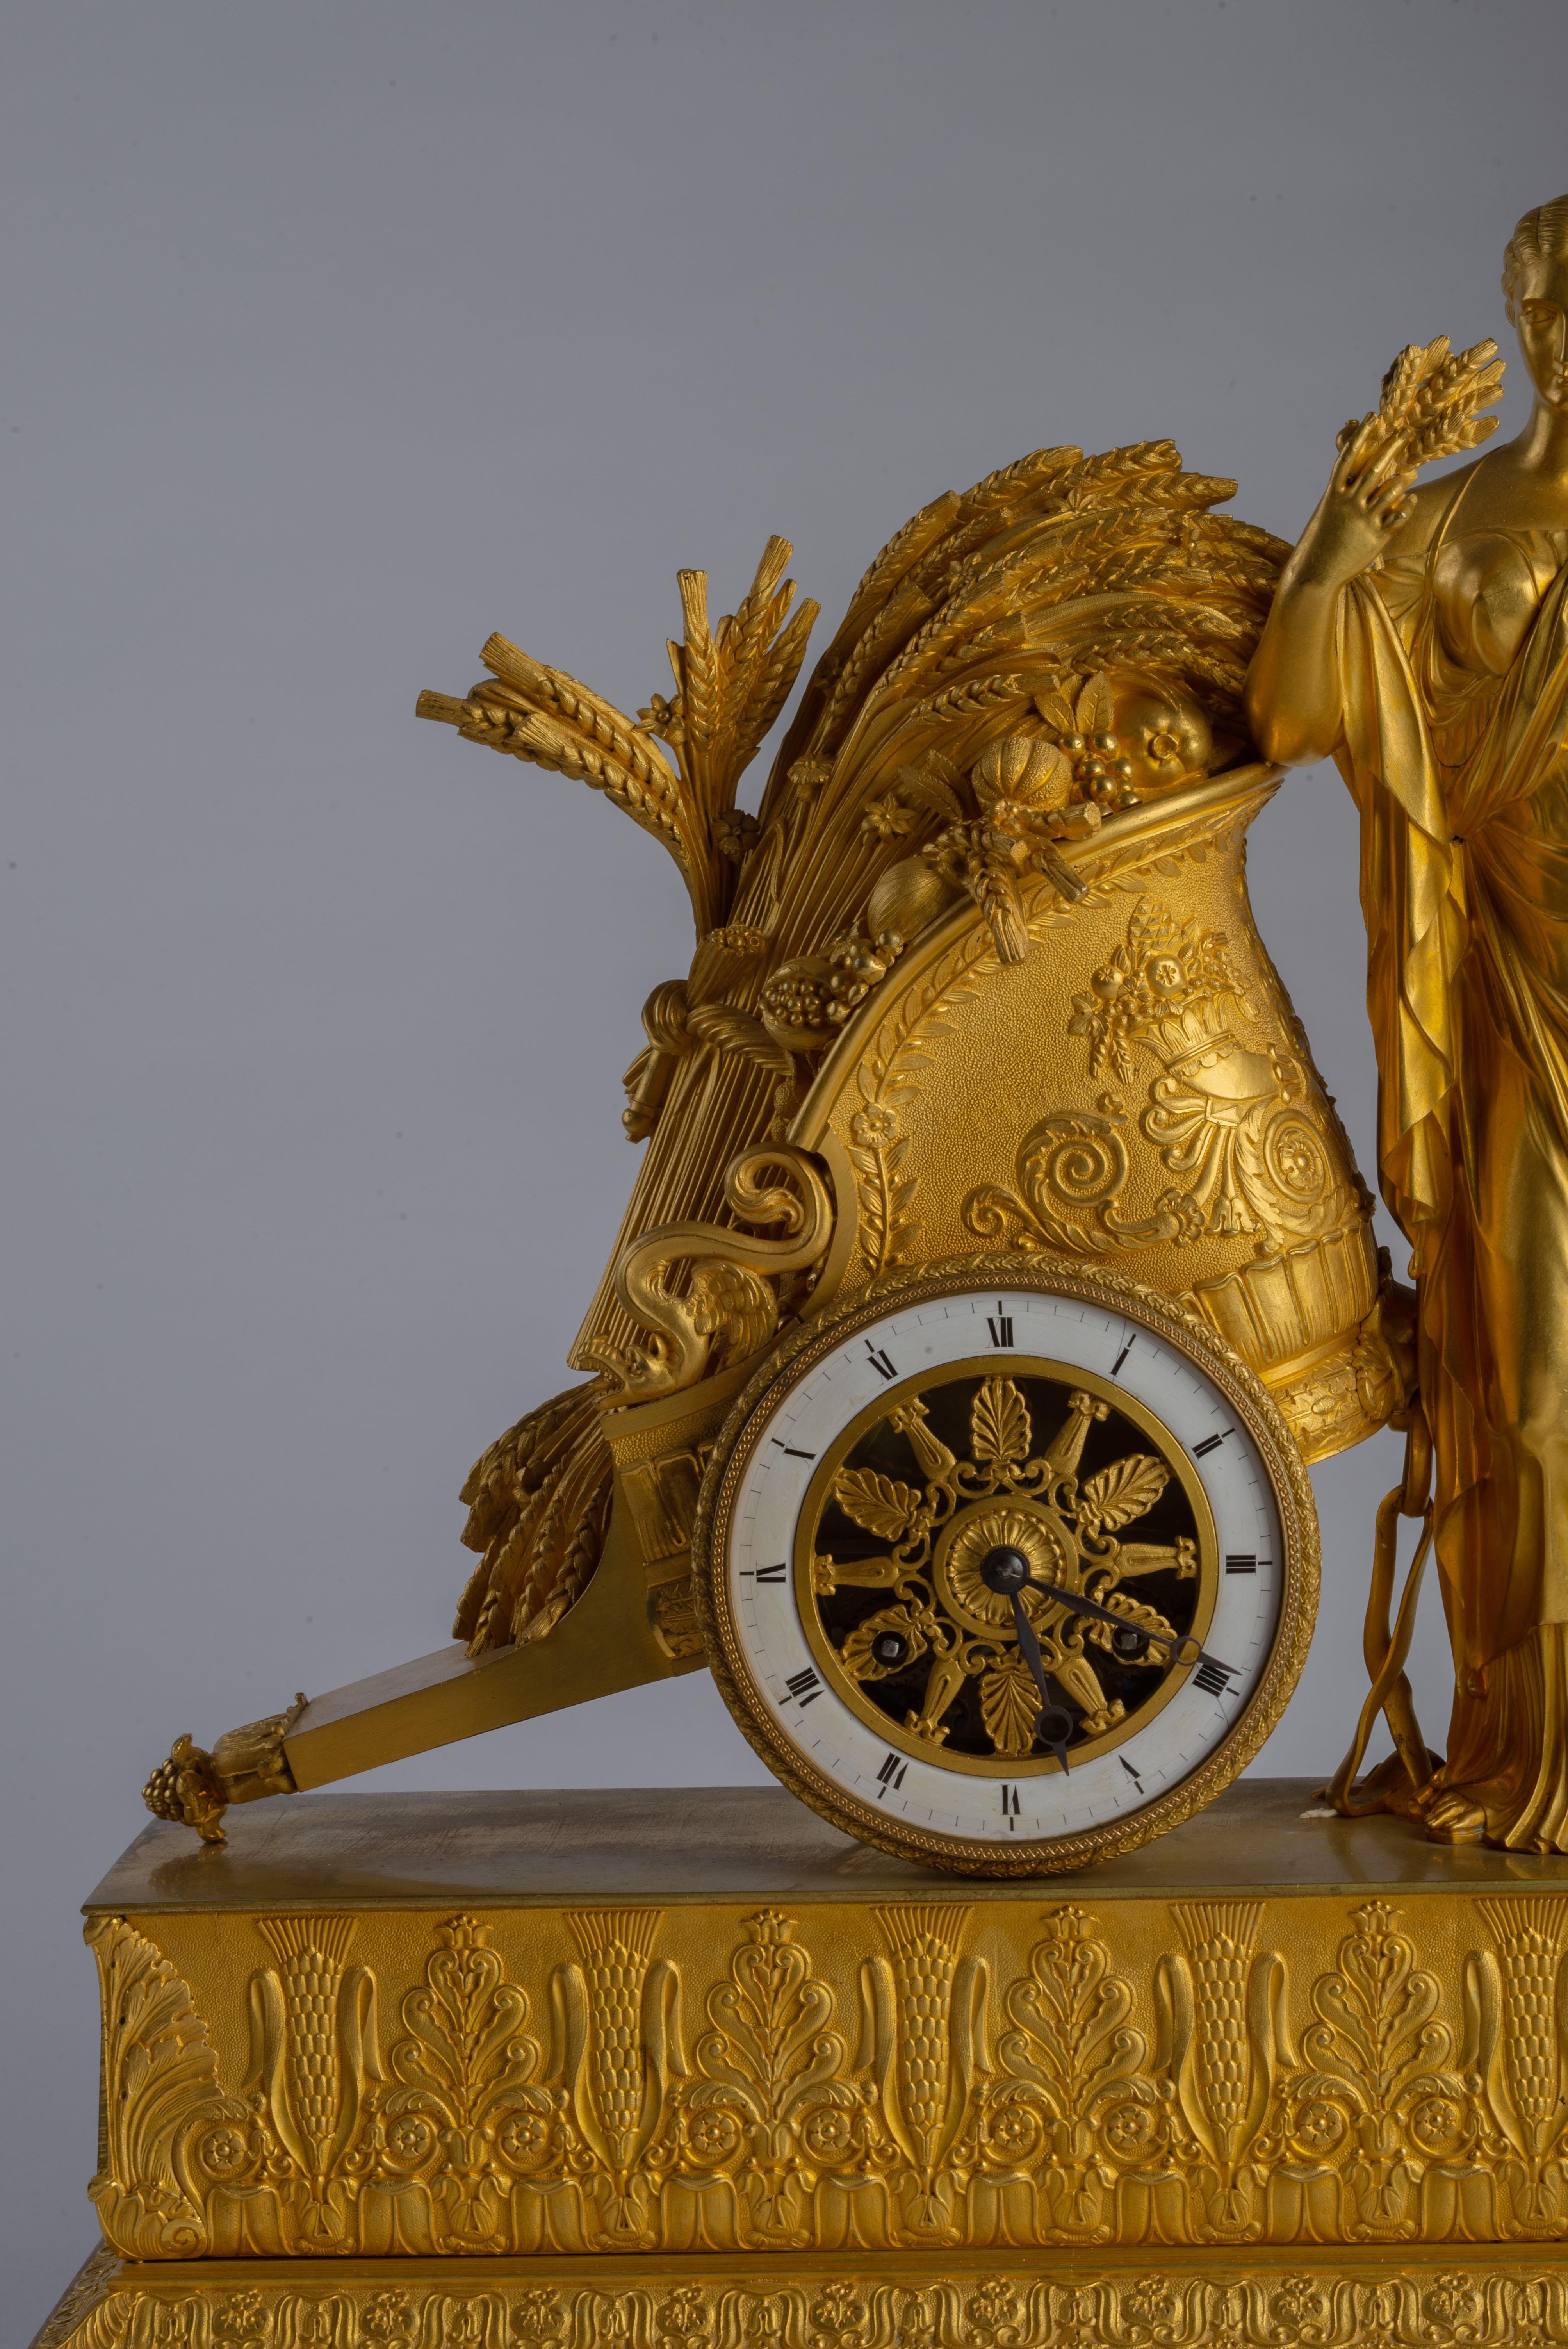 The rectangular base decorated with a wheat and foliate frieze and raised on four ball feet, the goddess of agriculture Ceres standing while leaning against a Roman chariot with harvested wheat, the dial with roman numerals forming its wheel.
The